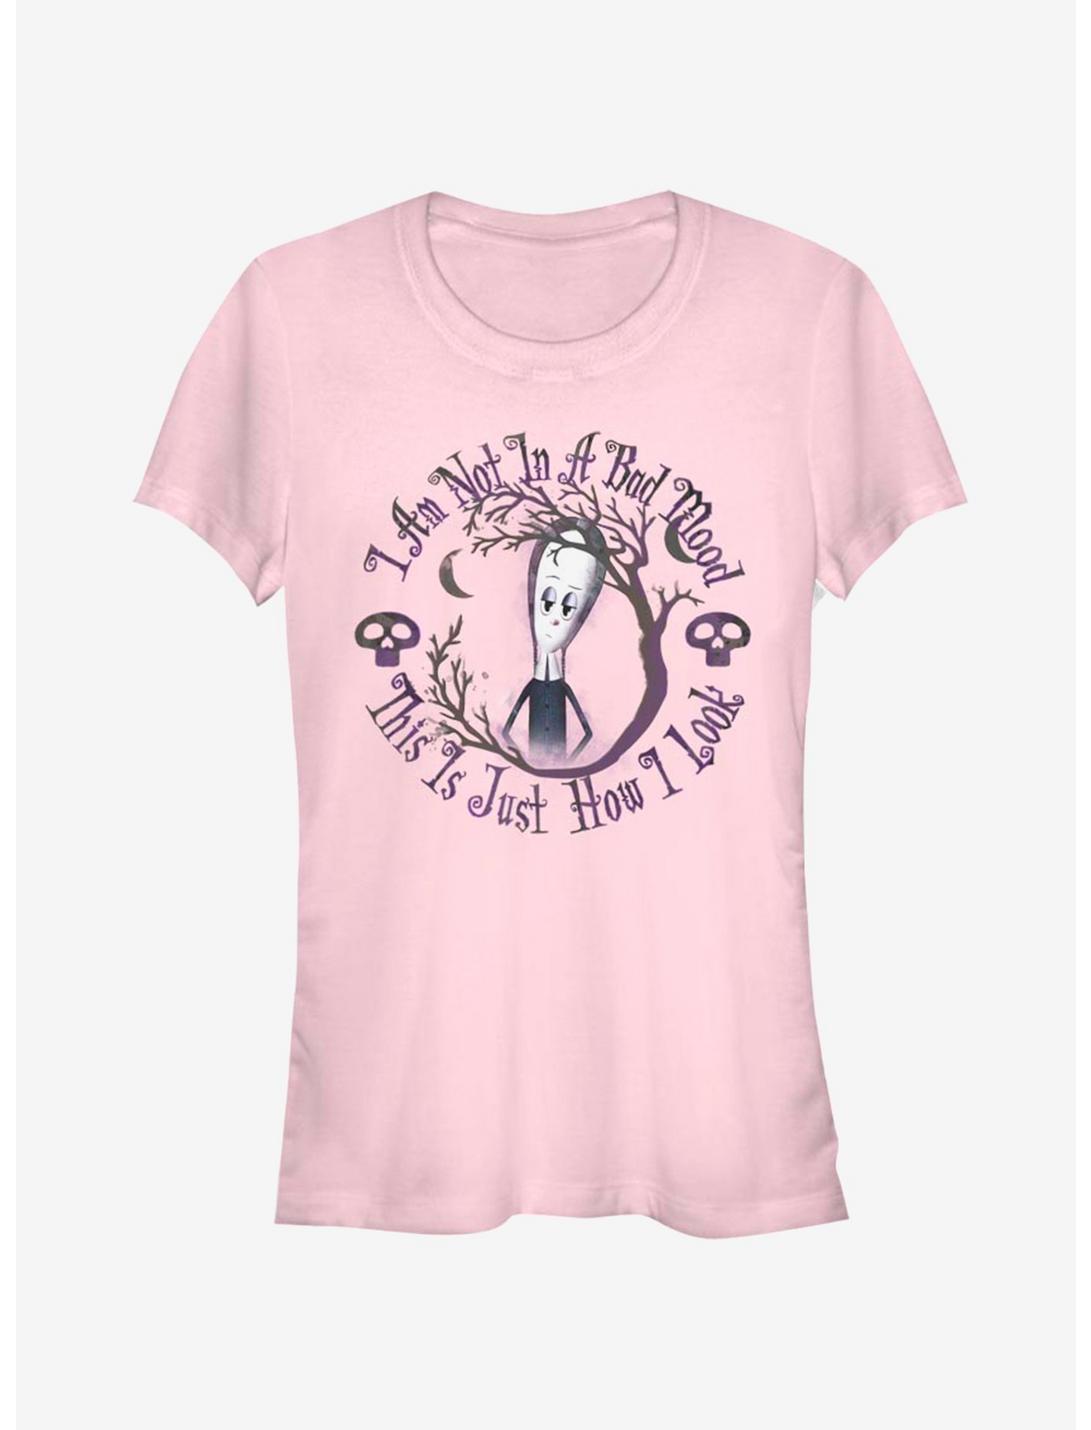 The Addams Family Wednesday Watercolor Girls T-Shirt, LIGHT PINK, hi-res